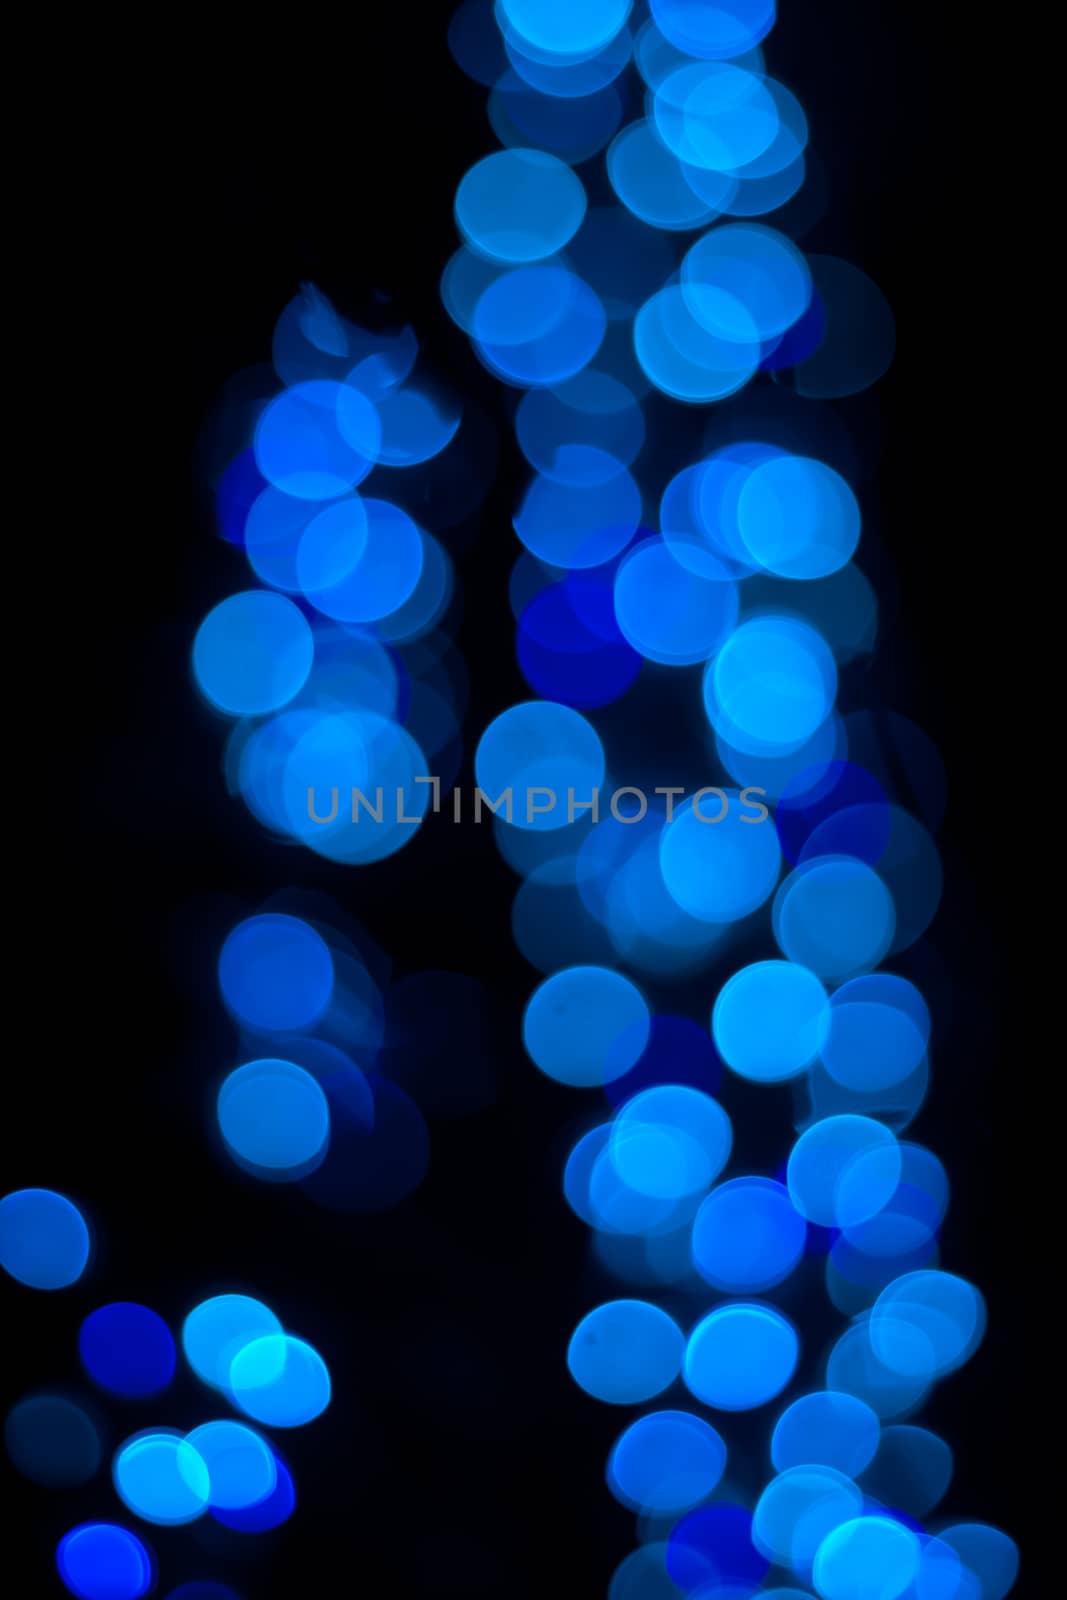 bokeh blurred out of focus background 